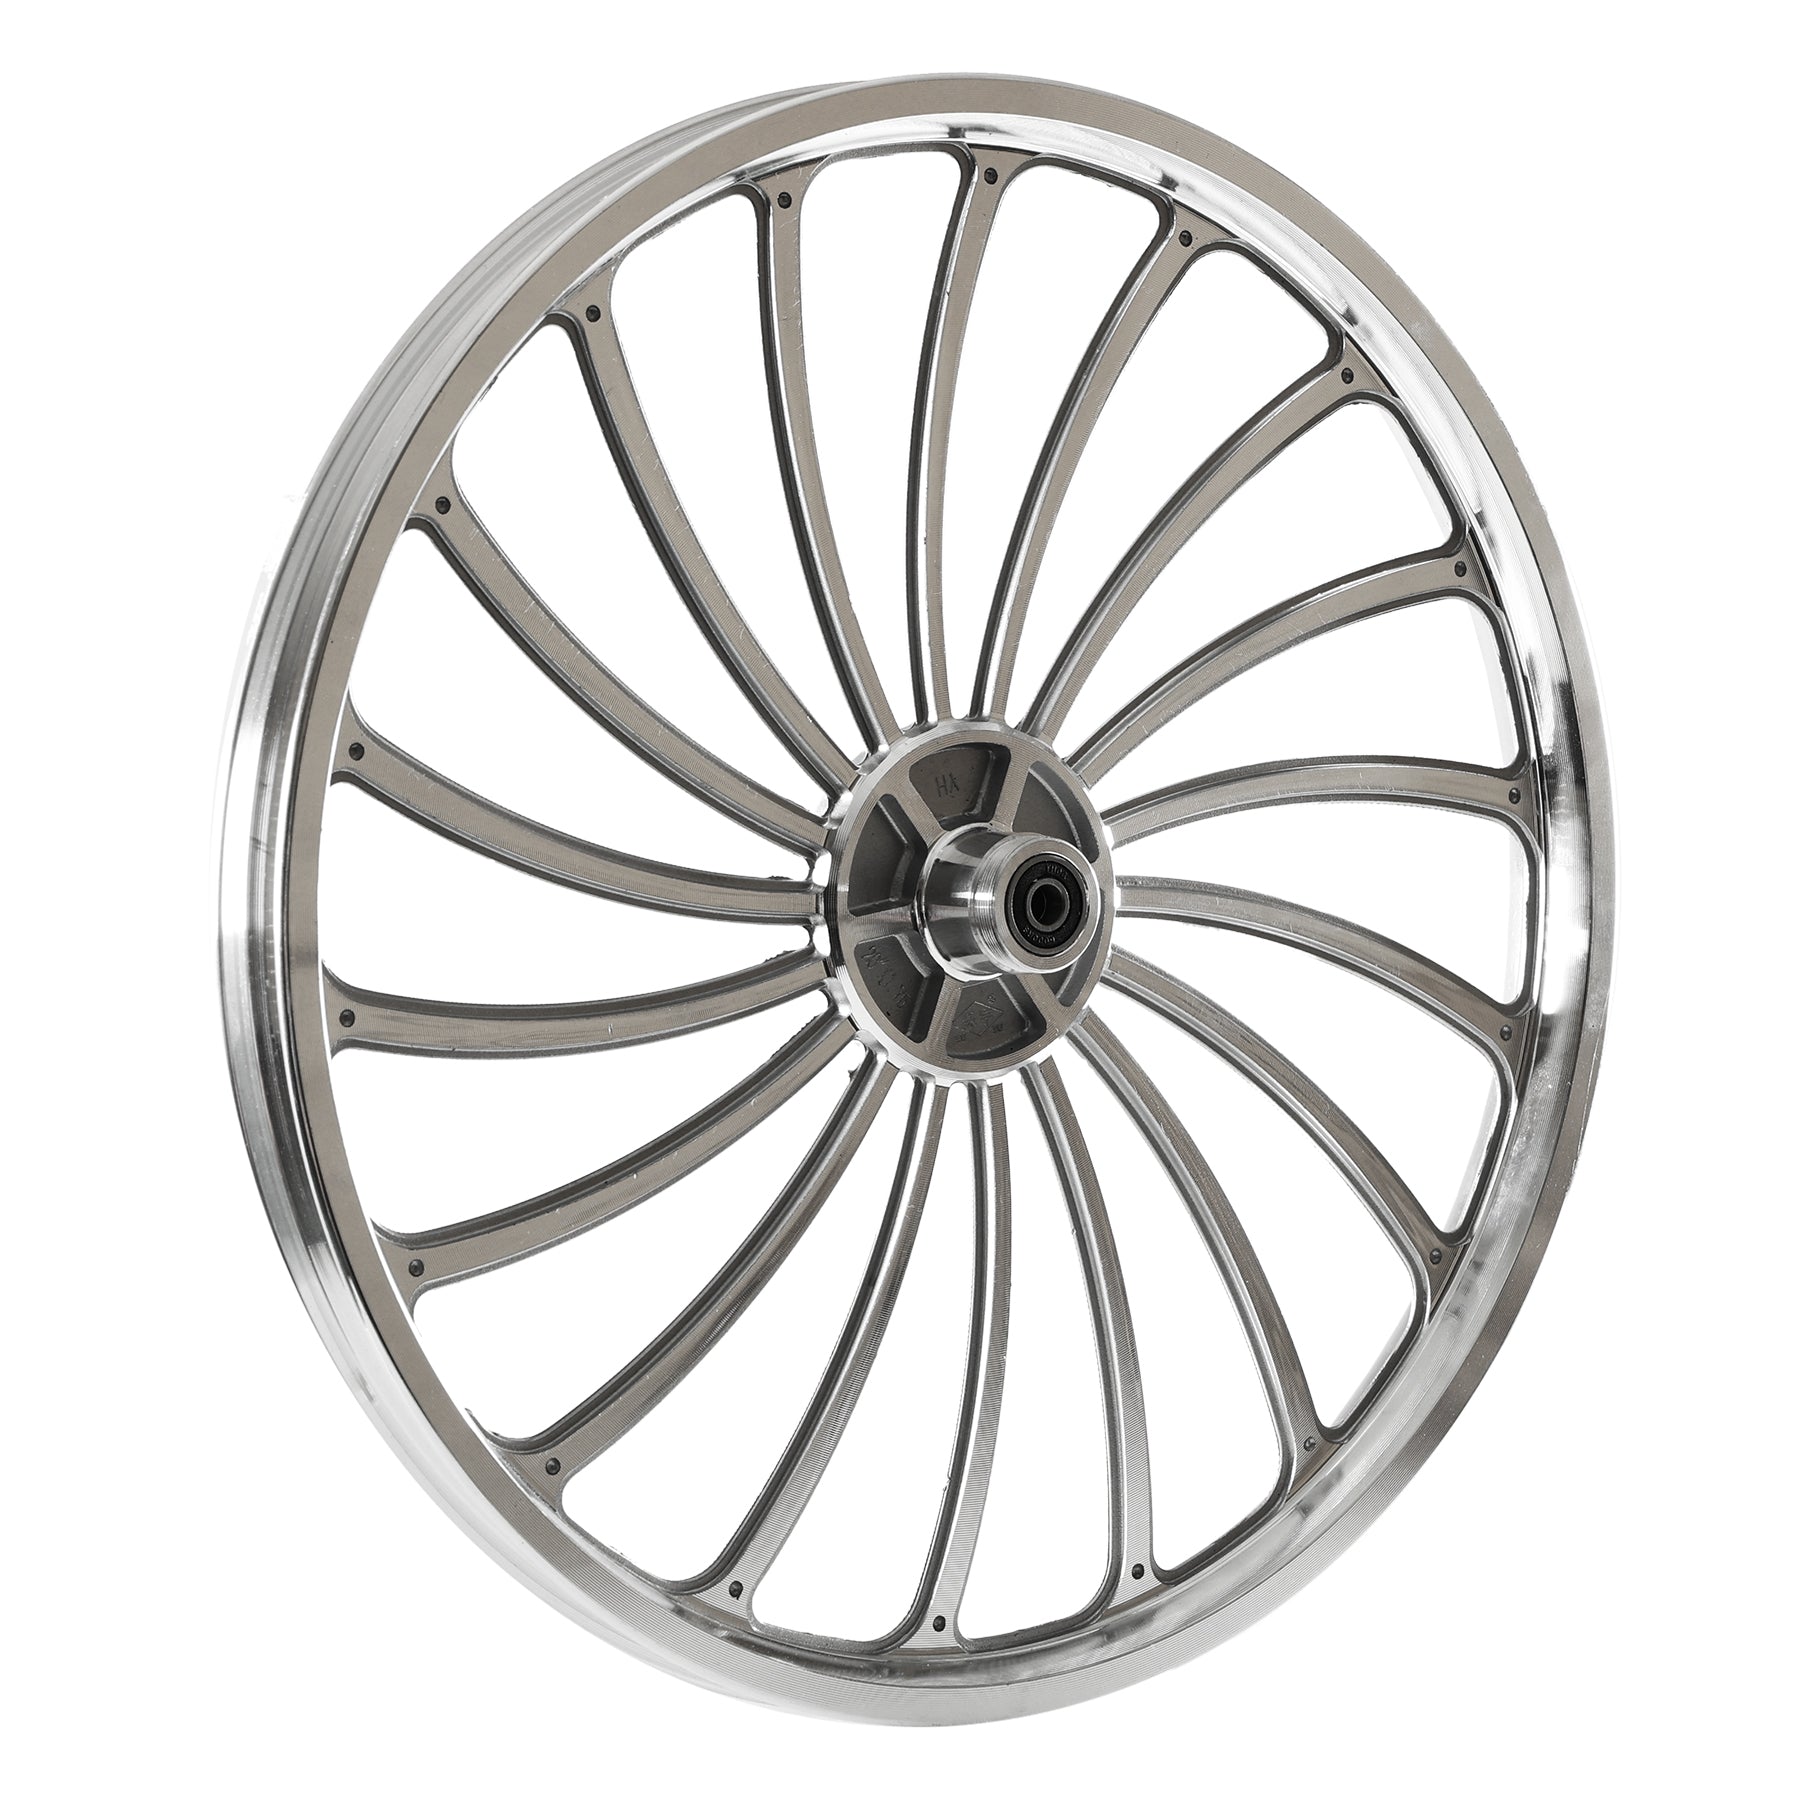 Tracer WH-HY-01 BMX 20'' Wheel Set alloy integrated molding CNC finishing surface.